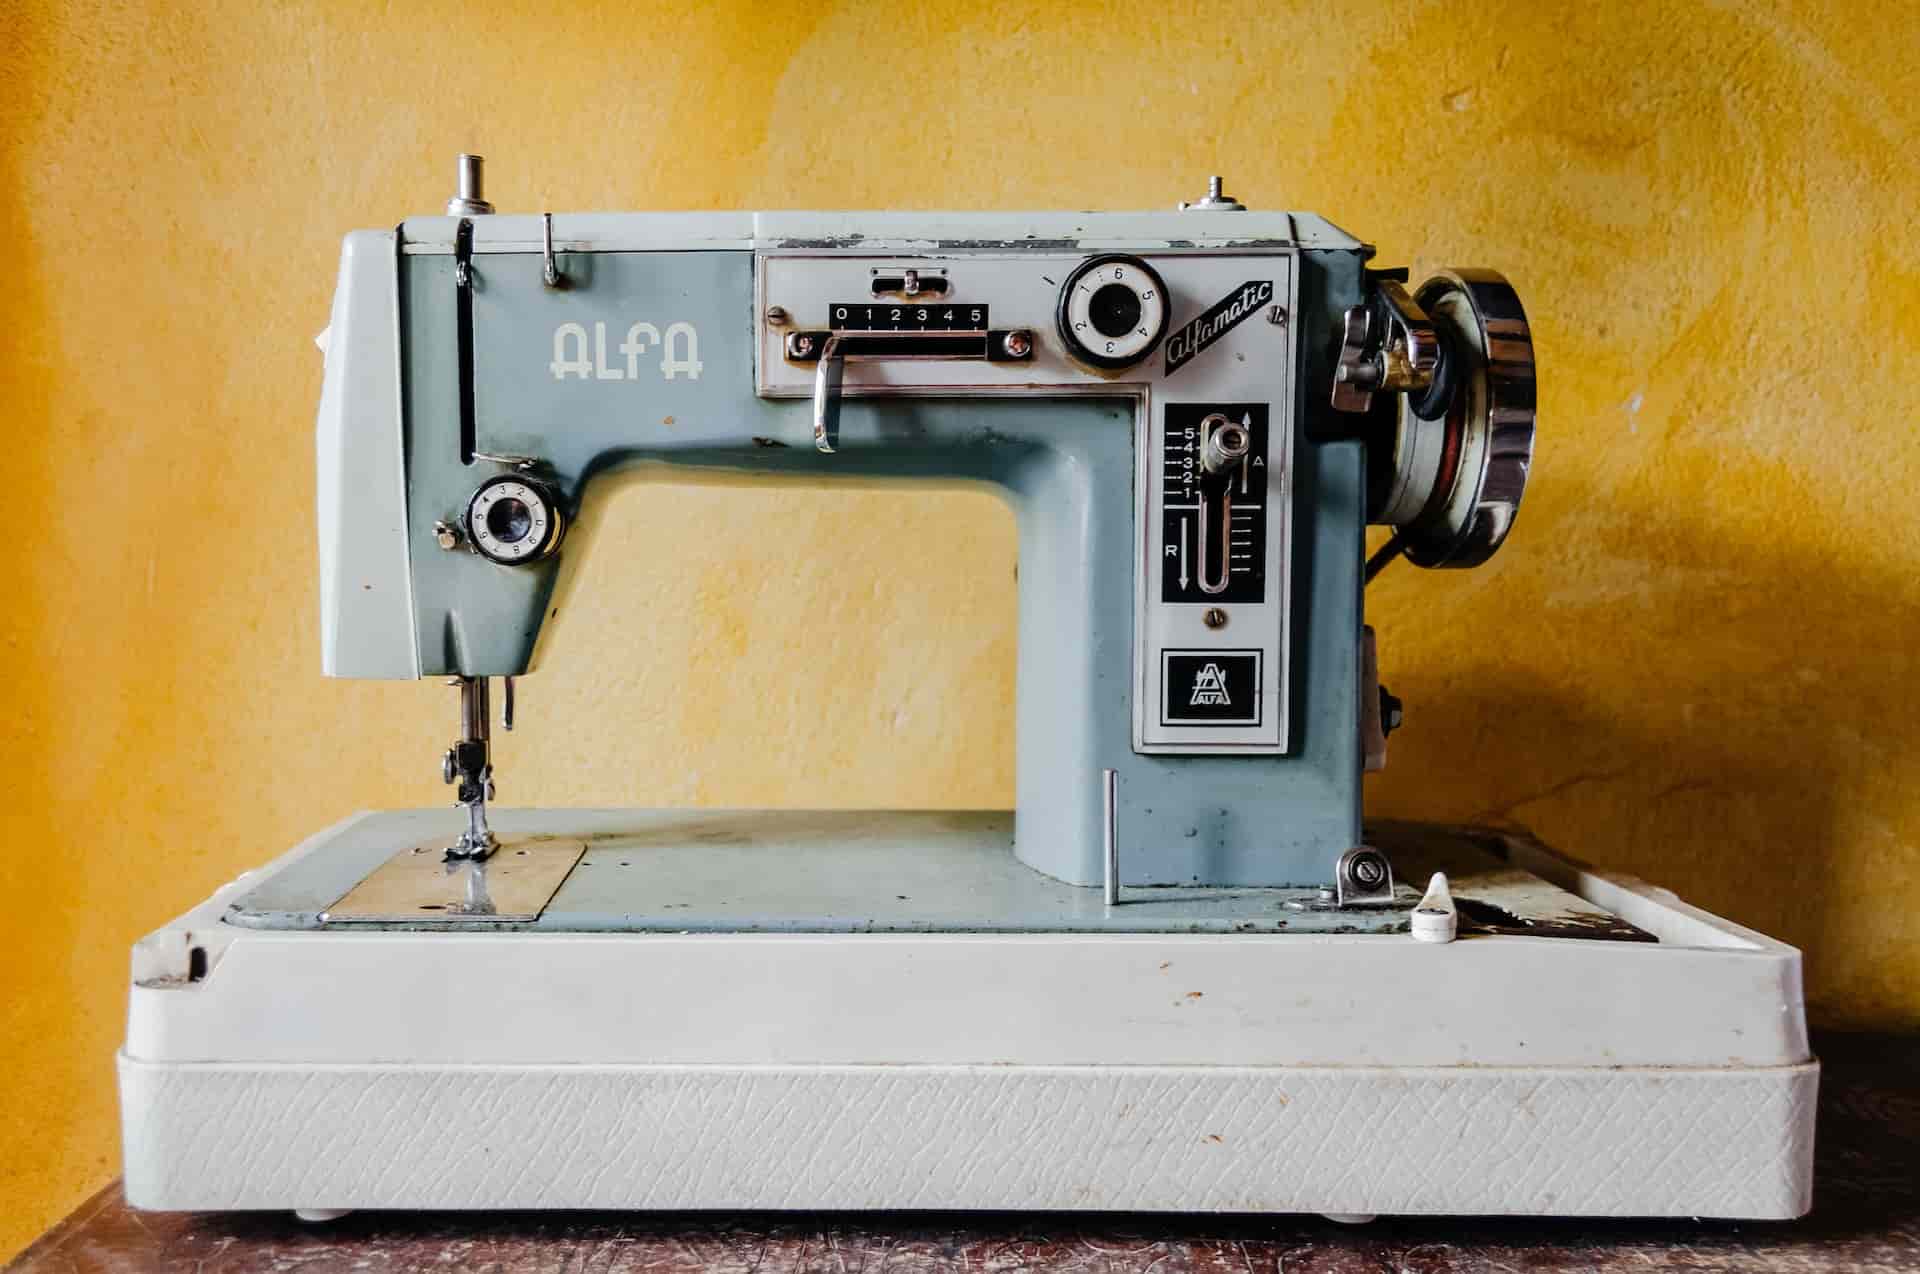 Sewing Machine which need servicing